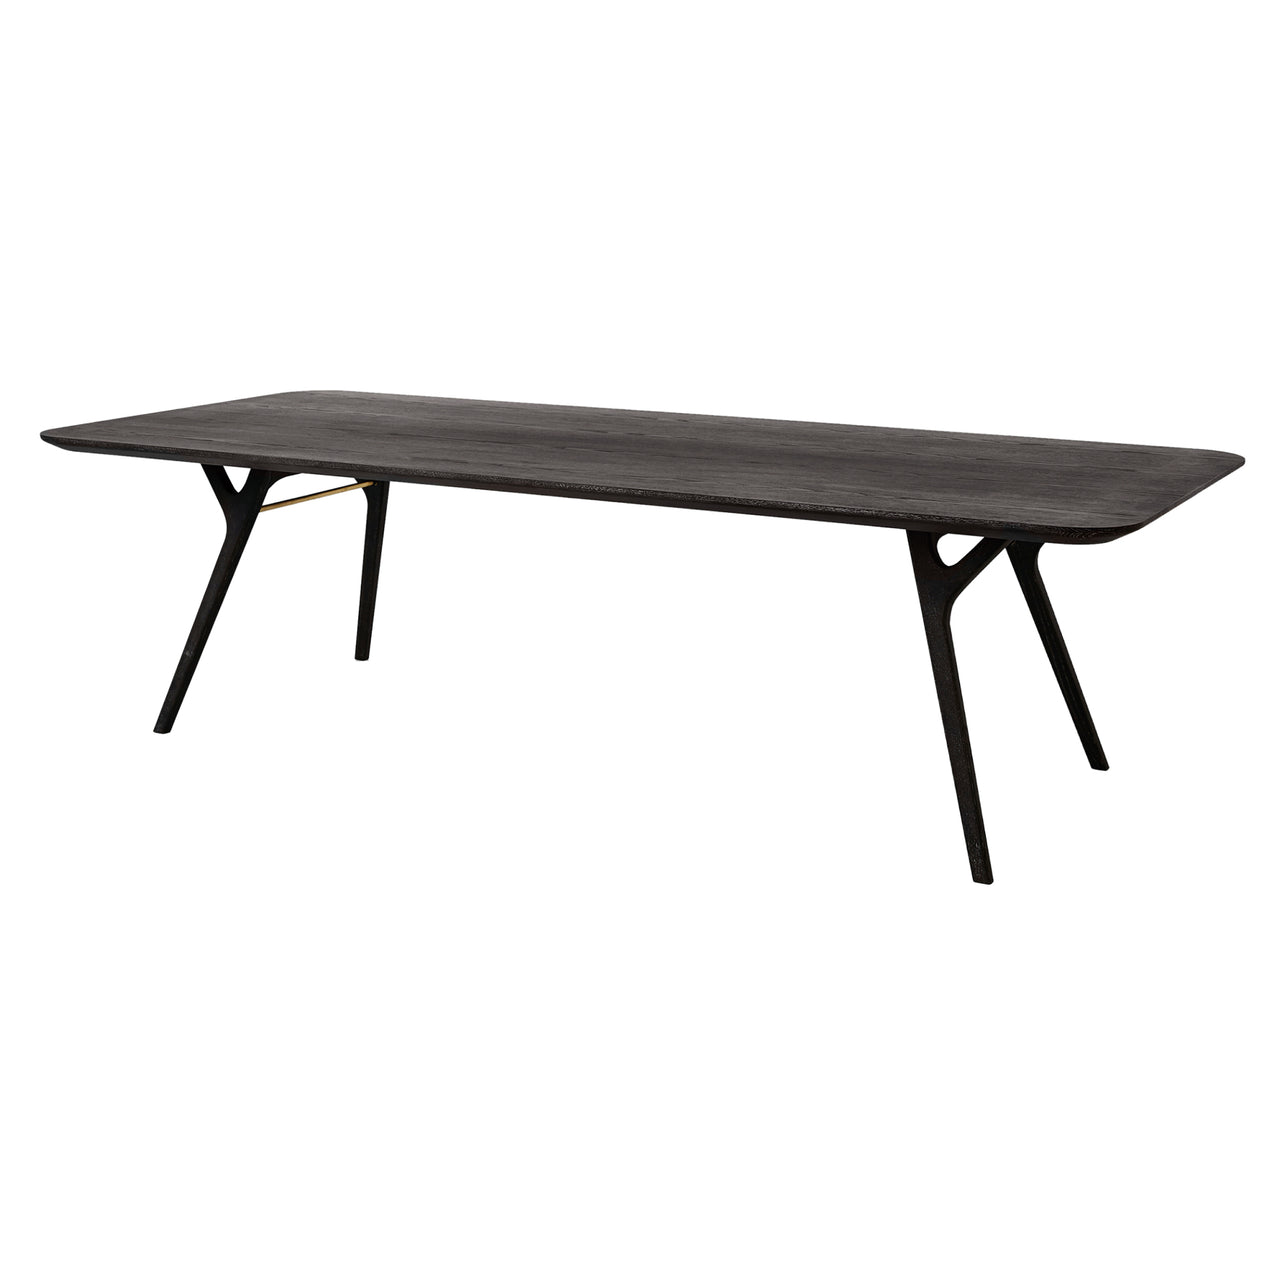 Ren Dining Table: Large - 102.4